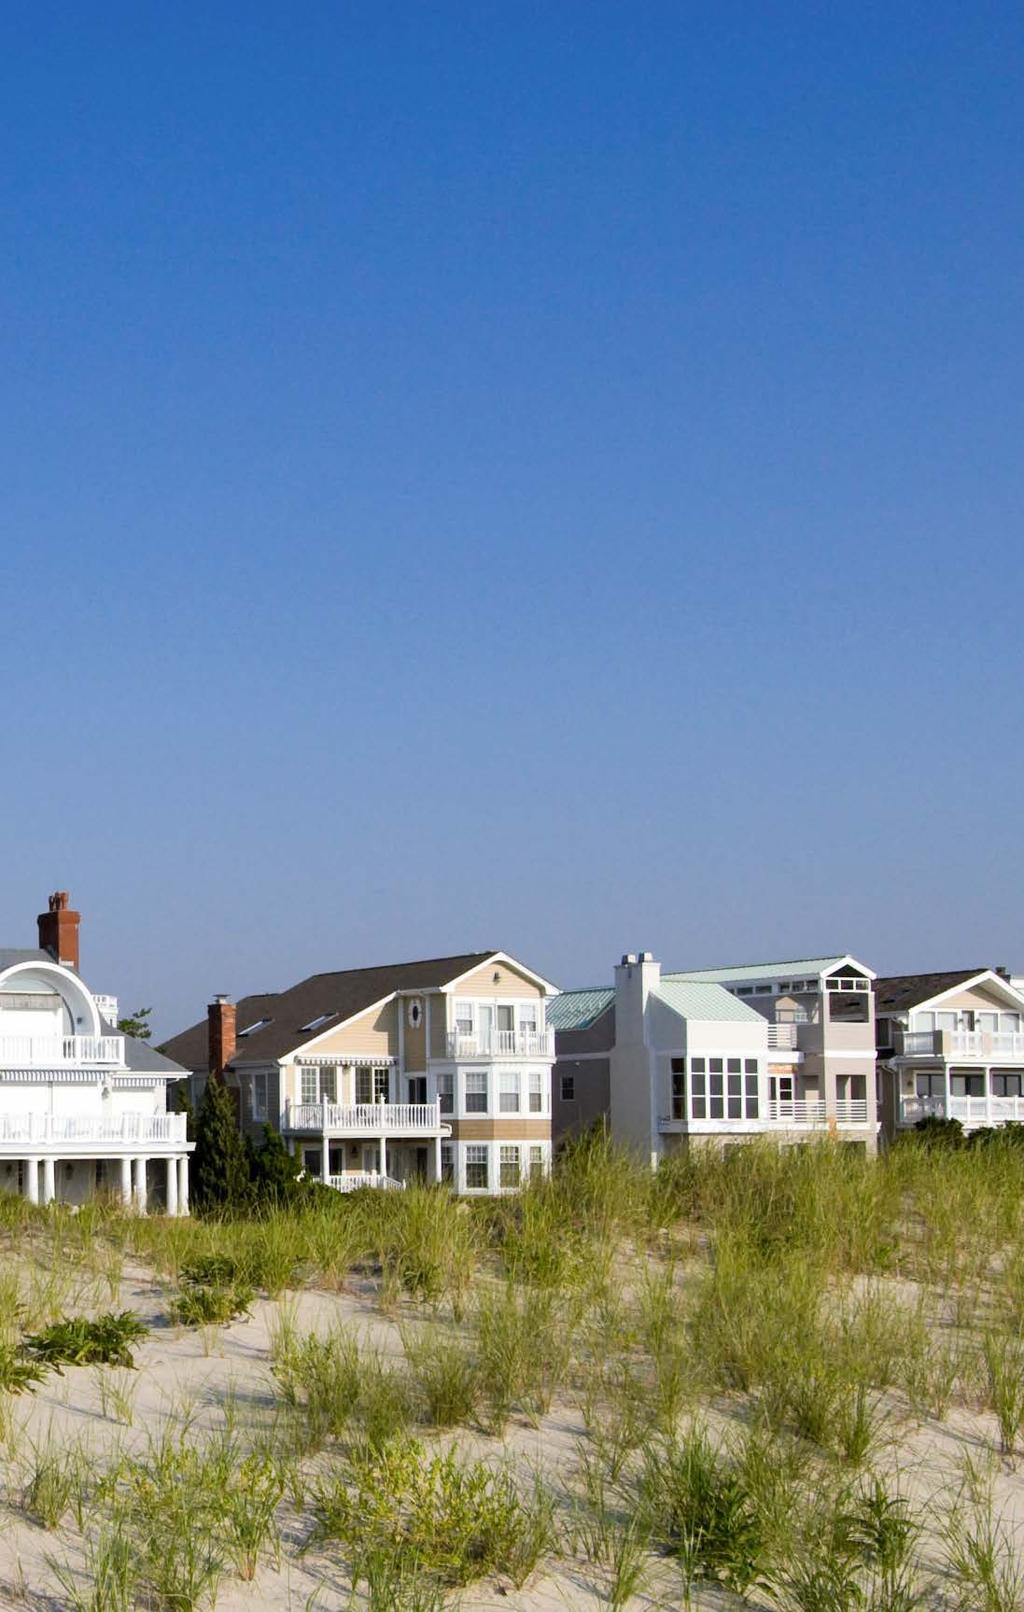 THE COASTAL LIFE Situated in Toms River, New Jersey, near the Atlantic coastline, Ocean County Mall attracts area families who enjoy coastal living near large metropolitan areas.